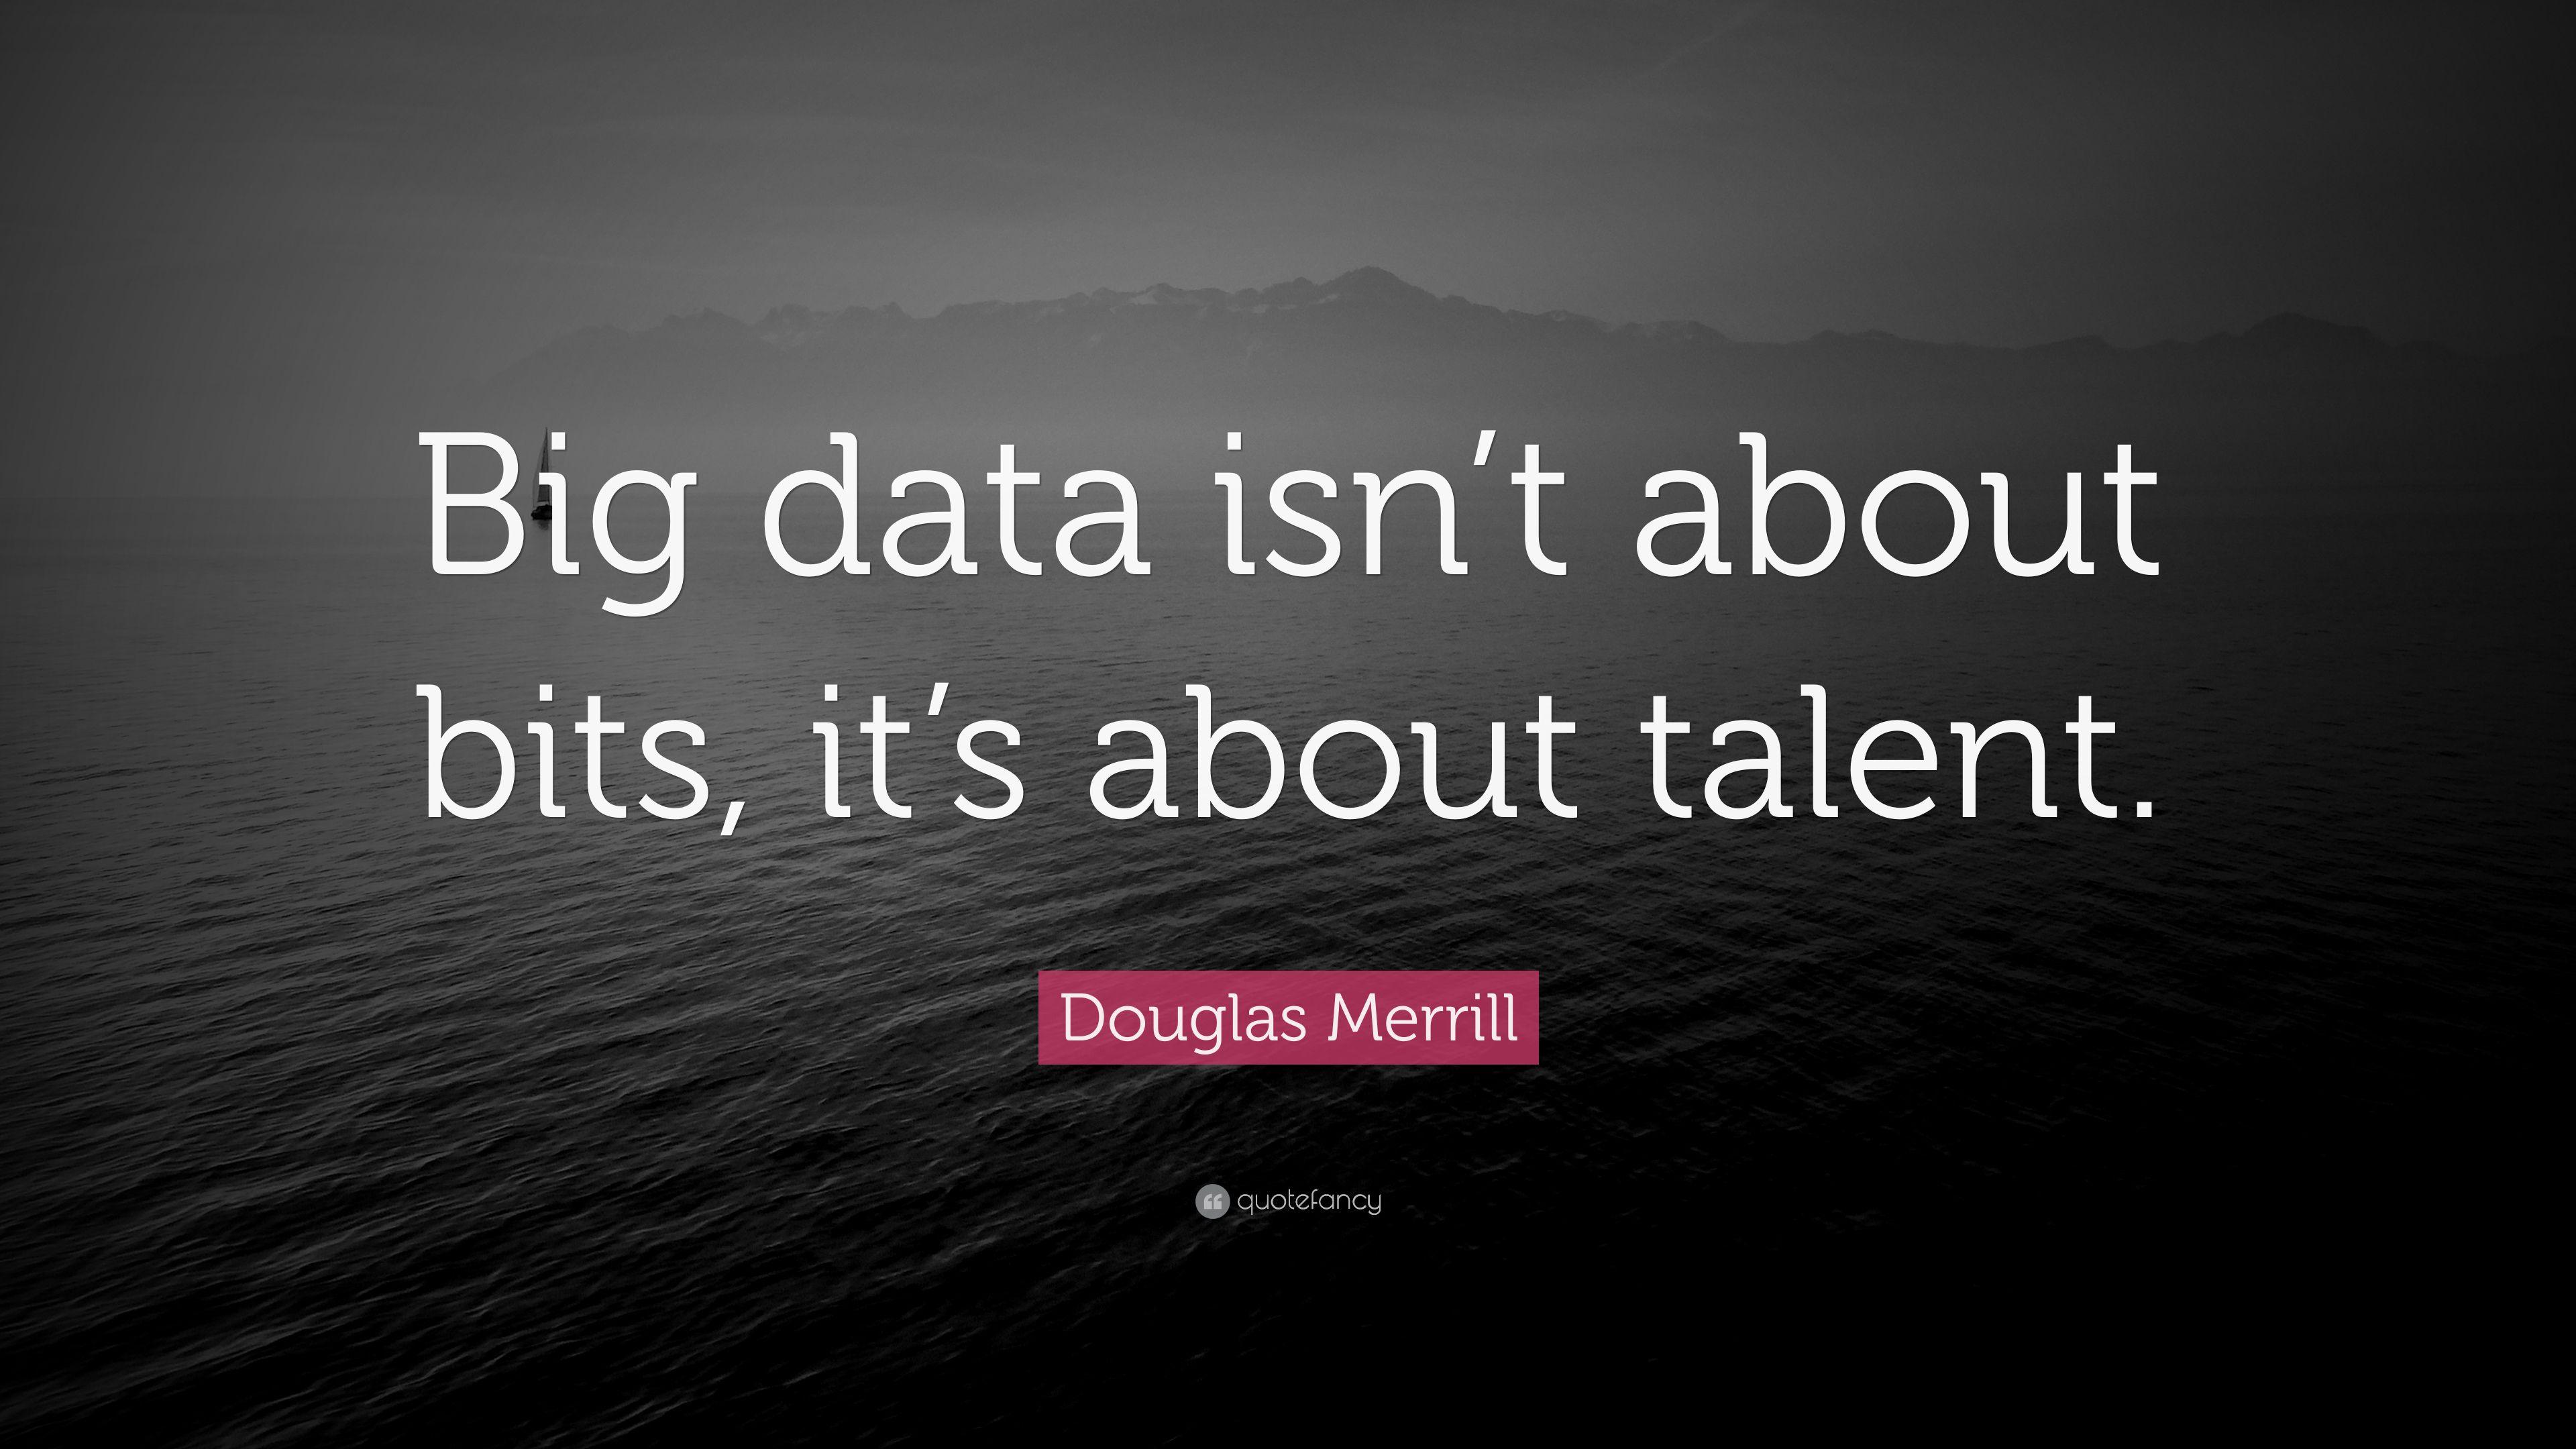 Douglas Merrill Quote: “Big data isn't about bits, it's about talent